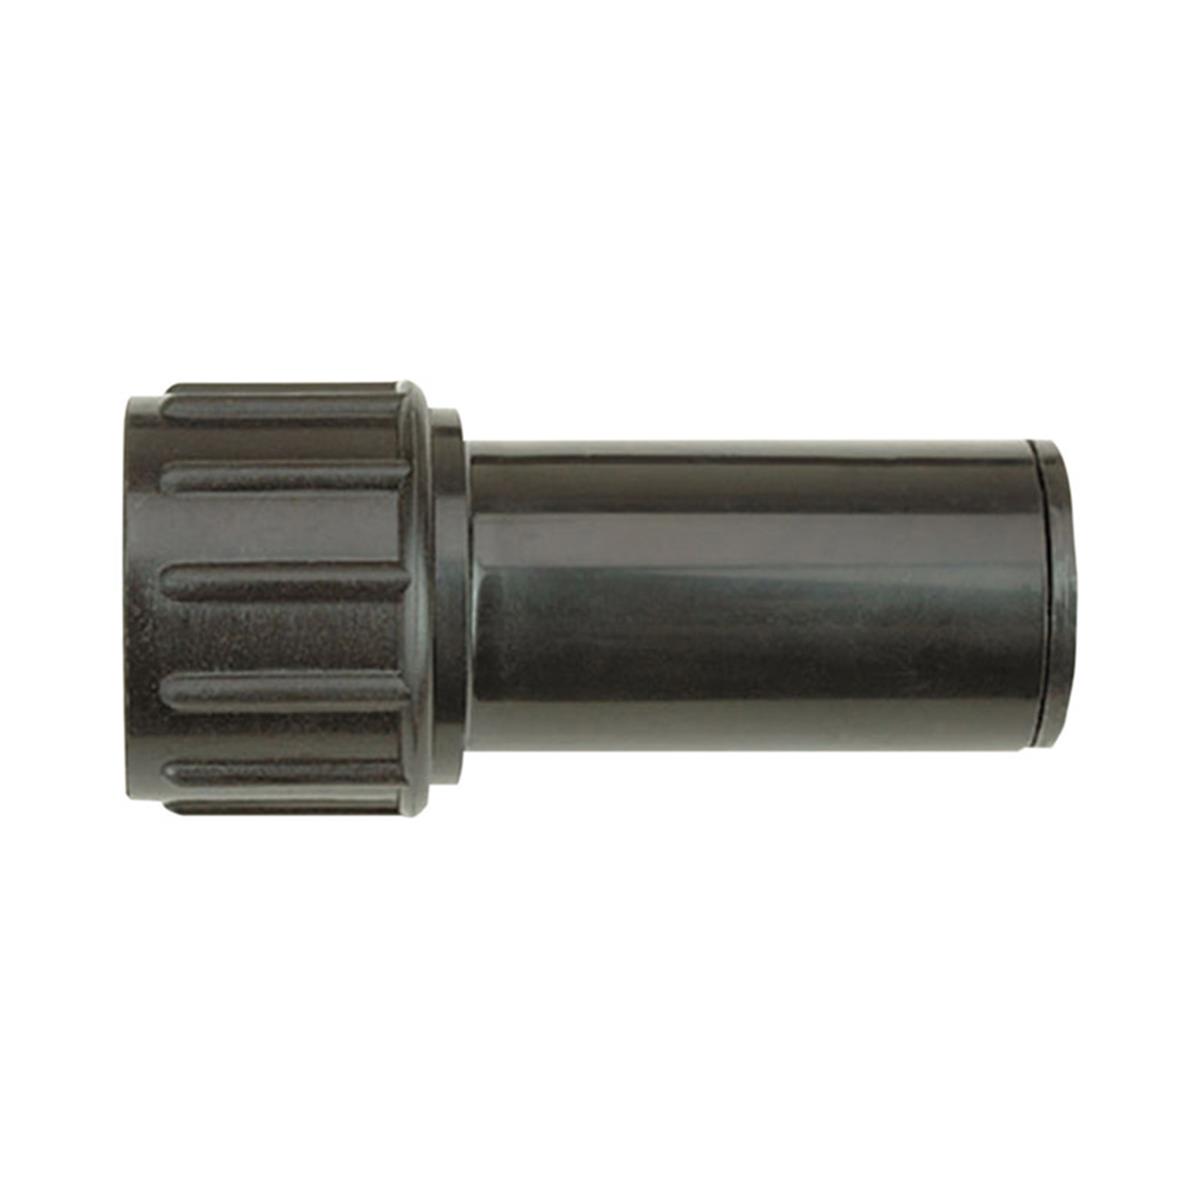 Picture of National Diversified 7107204 0.75-0.62 in. Swivel Pipe Adapter